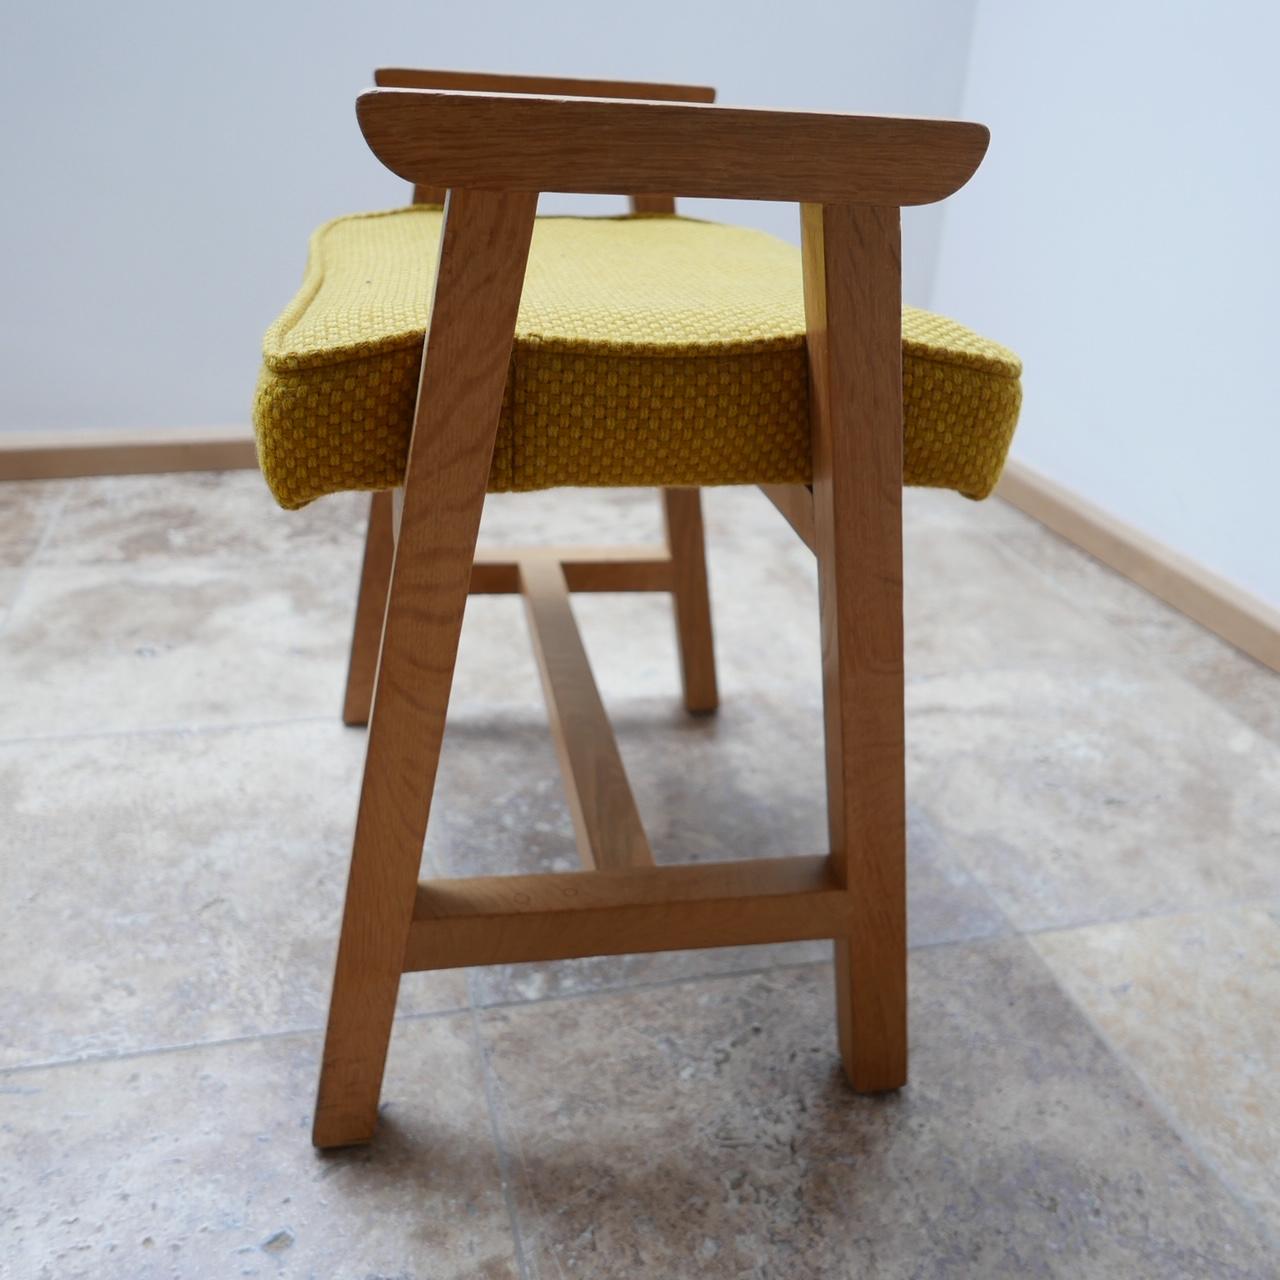 A well formed rare tabouret/stool by French design legends Guillerme et Chambron. 

Blonde oak, circa 1960s.

Original upholstery, perfectly usable but can do with updating. We can arrange for this to be done if needed. 

Dimensions: 37 D x 52